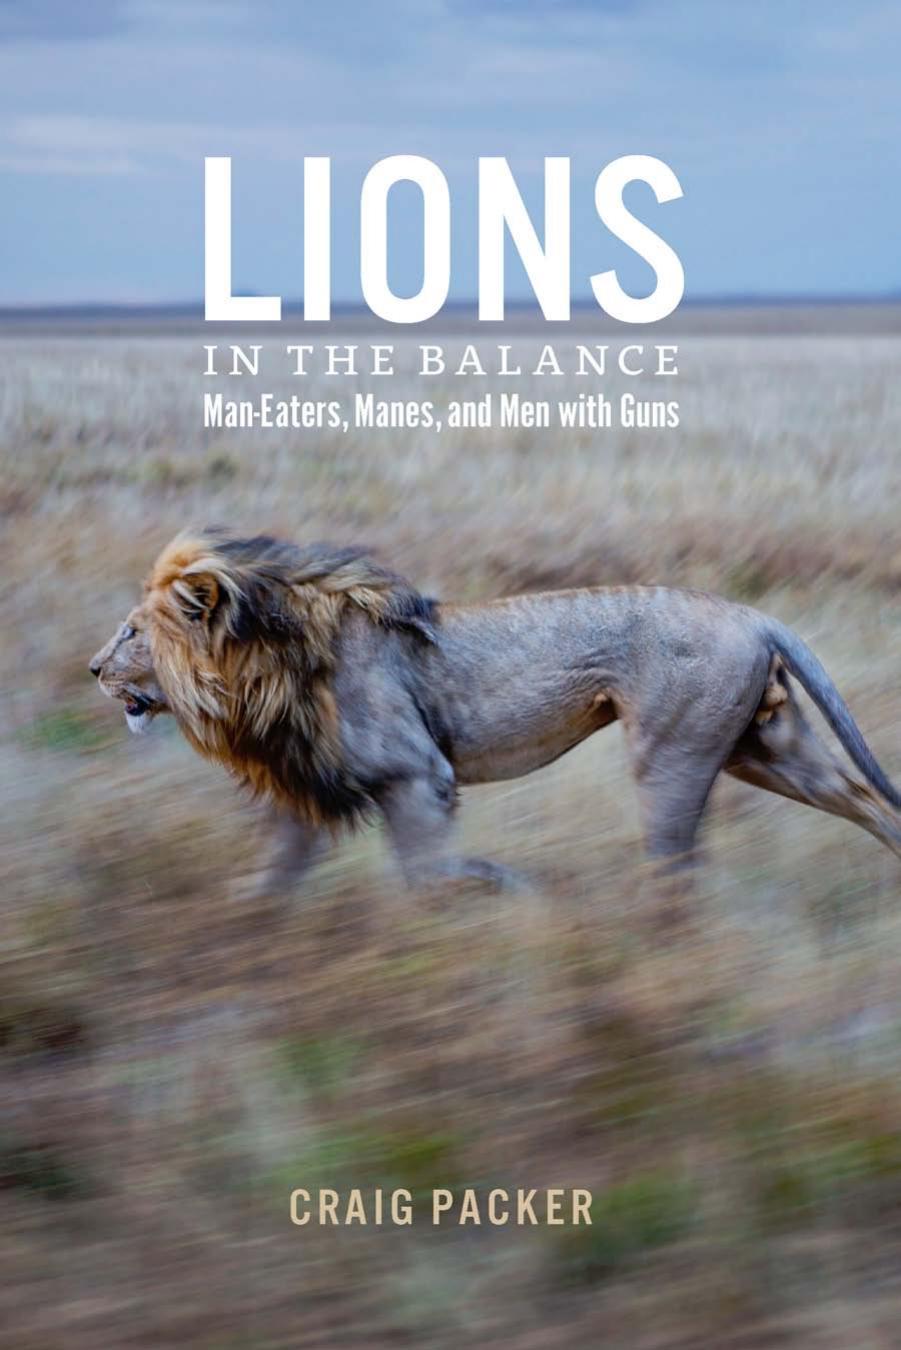 Lions in the Balance: Man-Eaters, Manes, and Men with Guns by Craig Packer